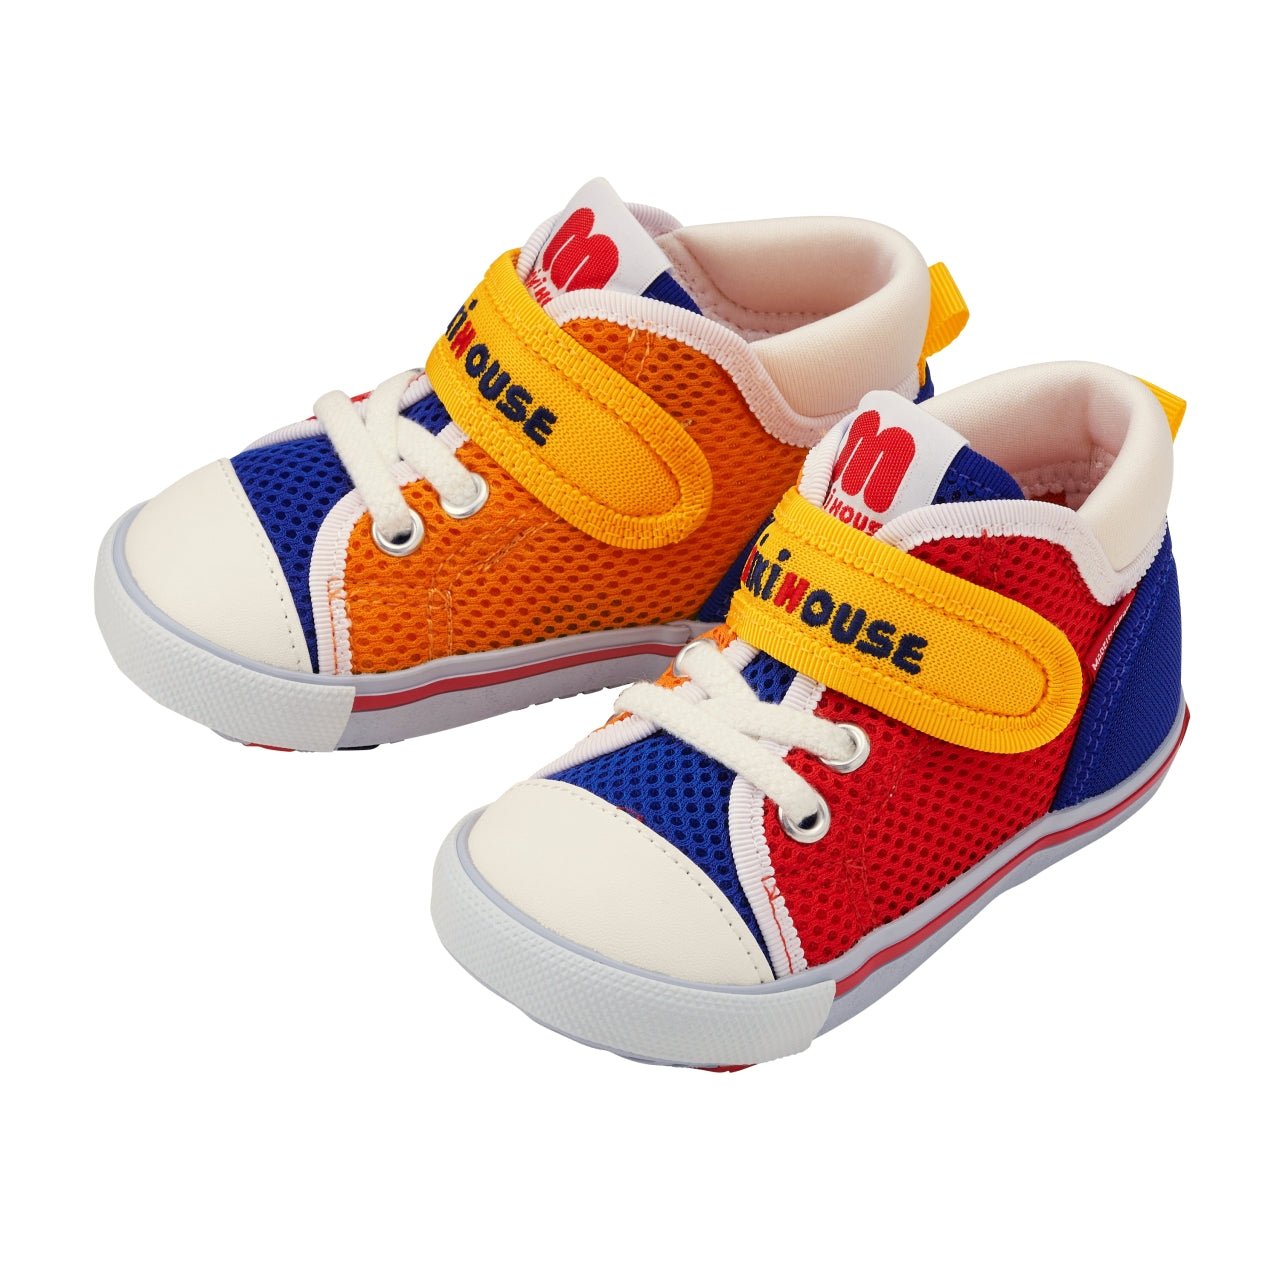 Double Russell Mesh Second Shoes - Blast from the Past - MIKI HOUSE USA